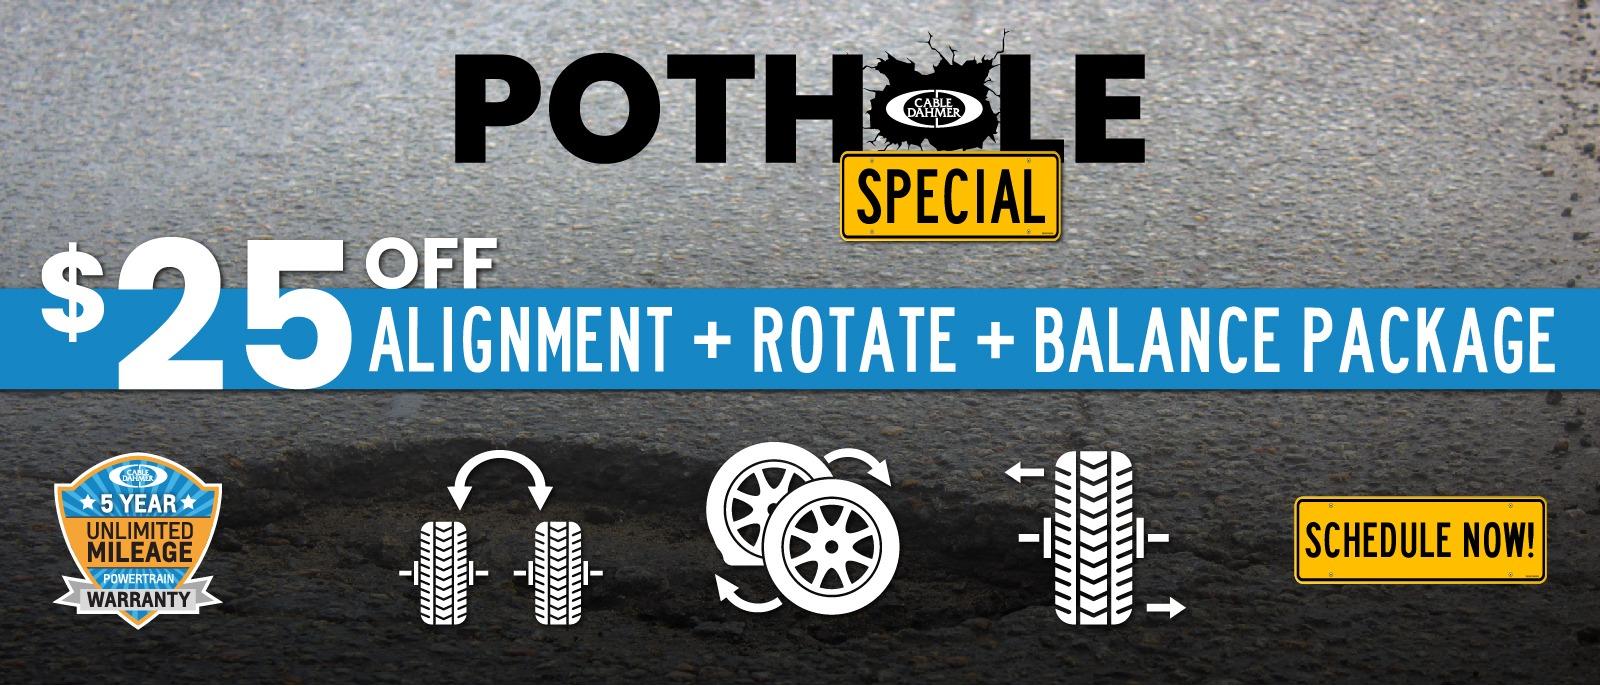 Pothole Special $25 Off Alignment, Rotate and Balance Package - Schedule Now